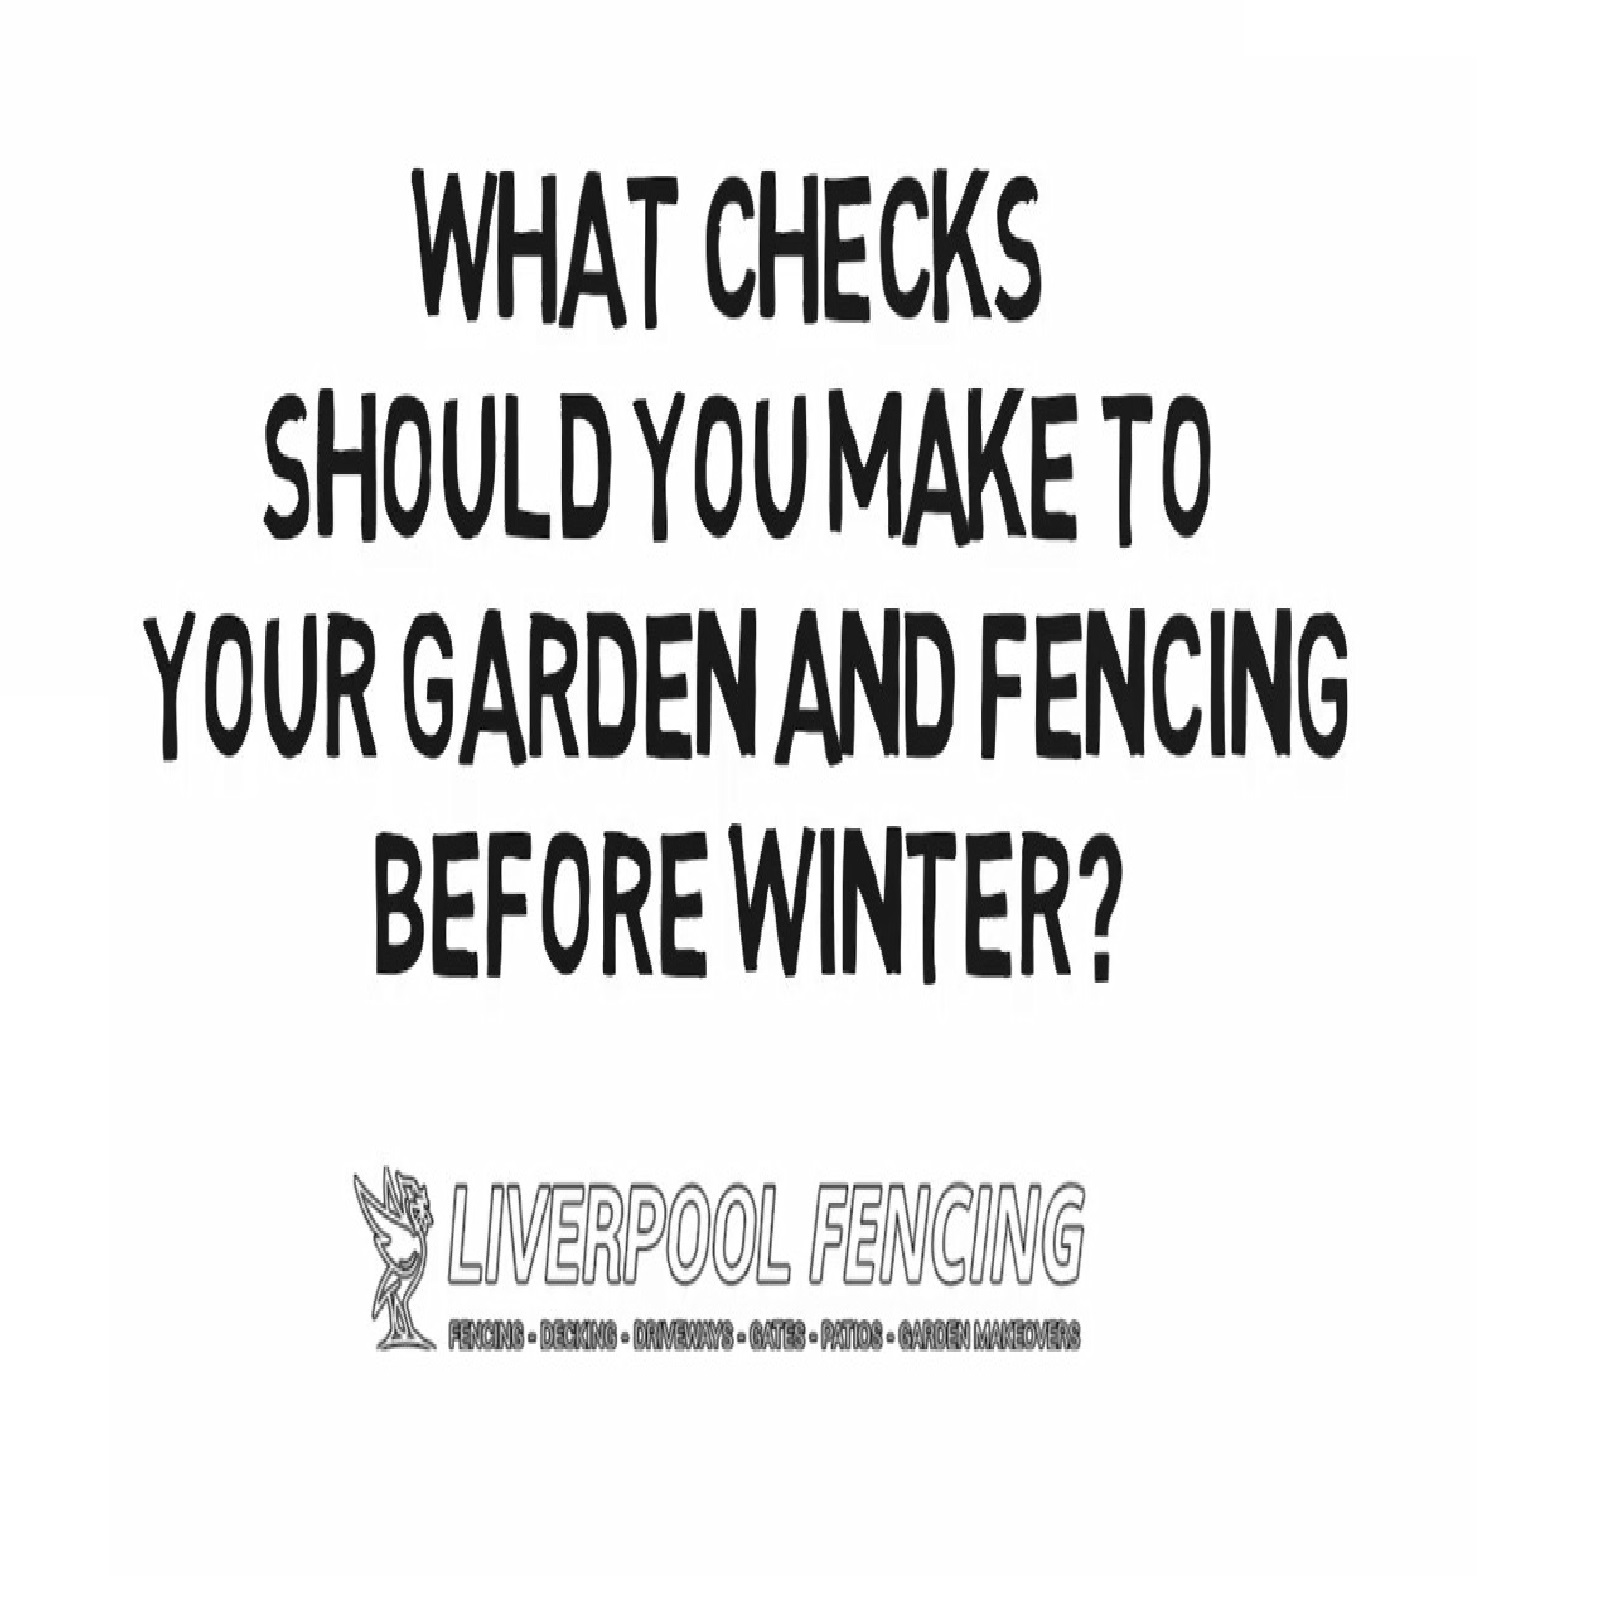 What Checks Should You Make To Your Garden And Fencing Before Winter?